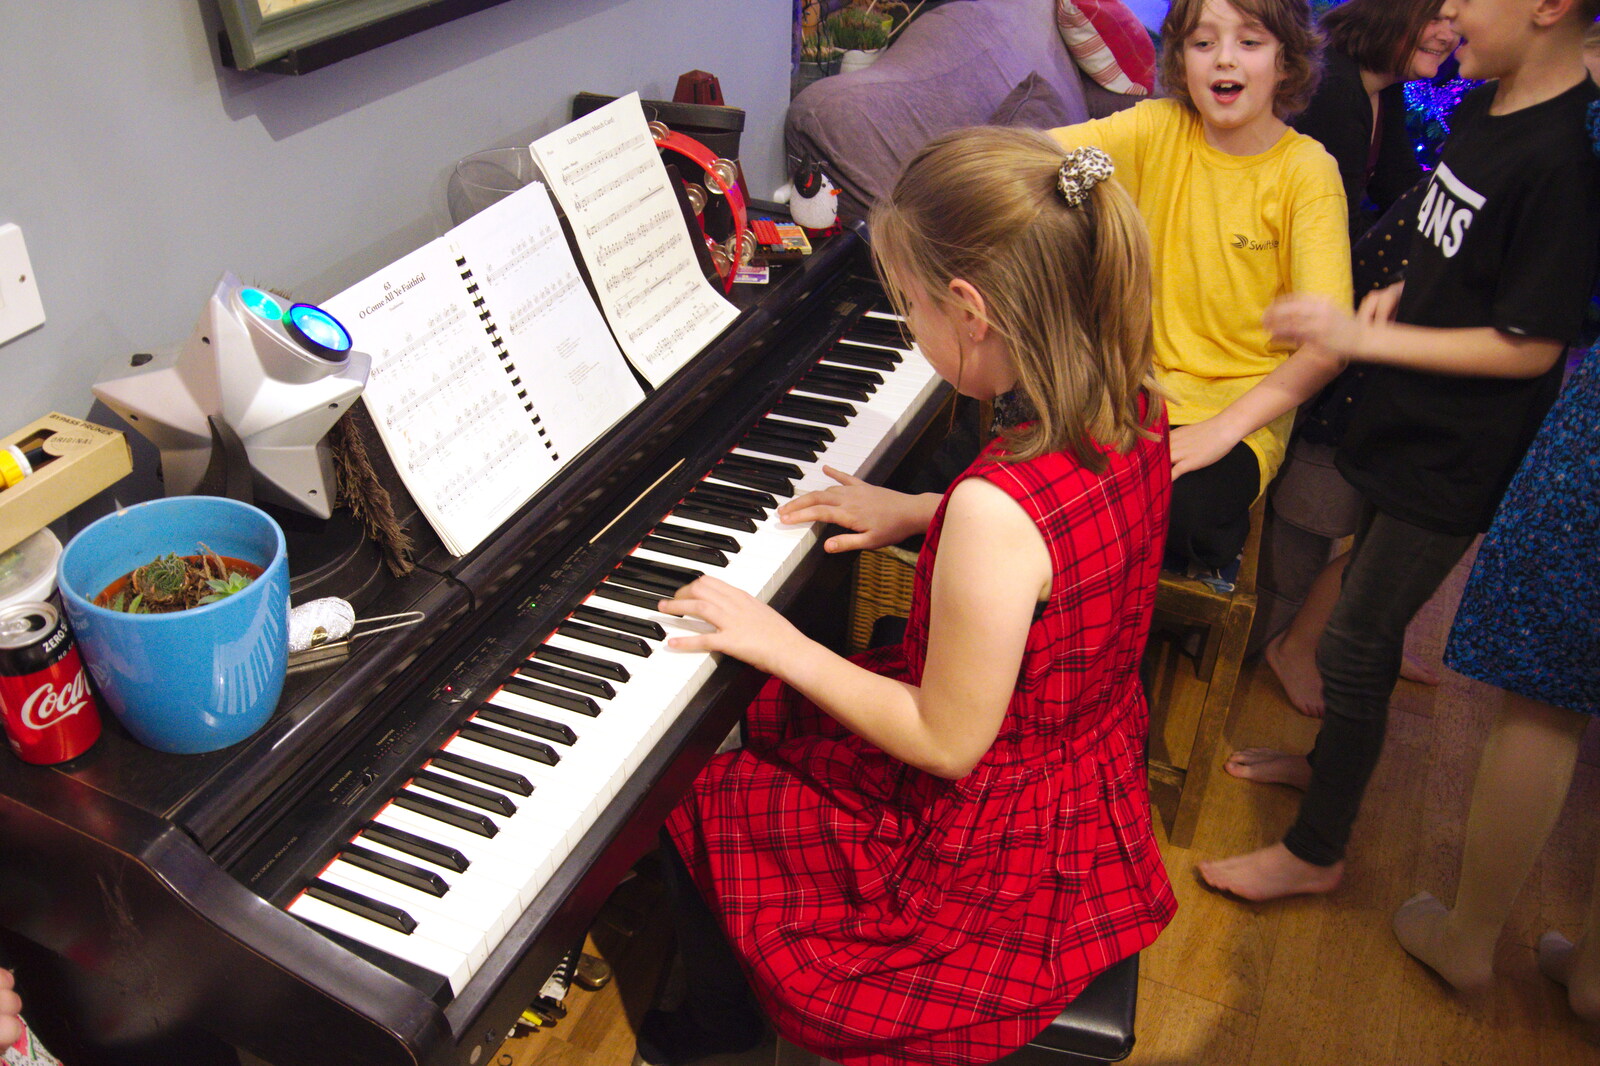 Soph the Roph plays piano in the back room from A New Year's Eve Party, Brome, Suffolk - 31st December 2019